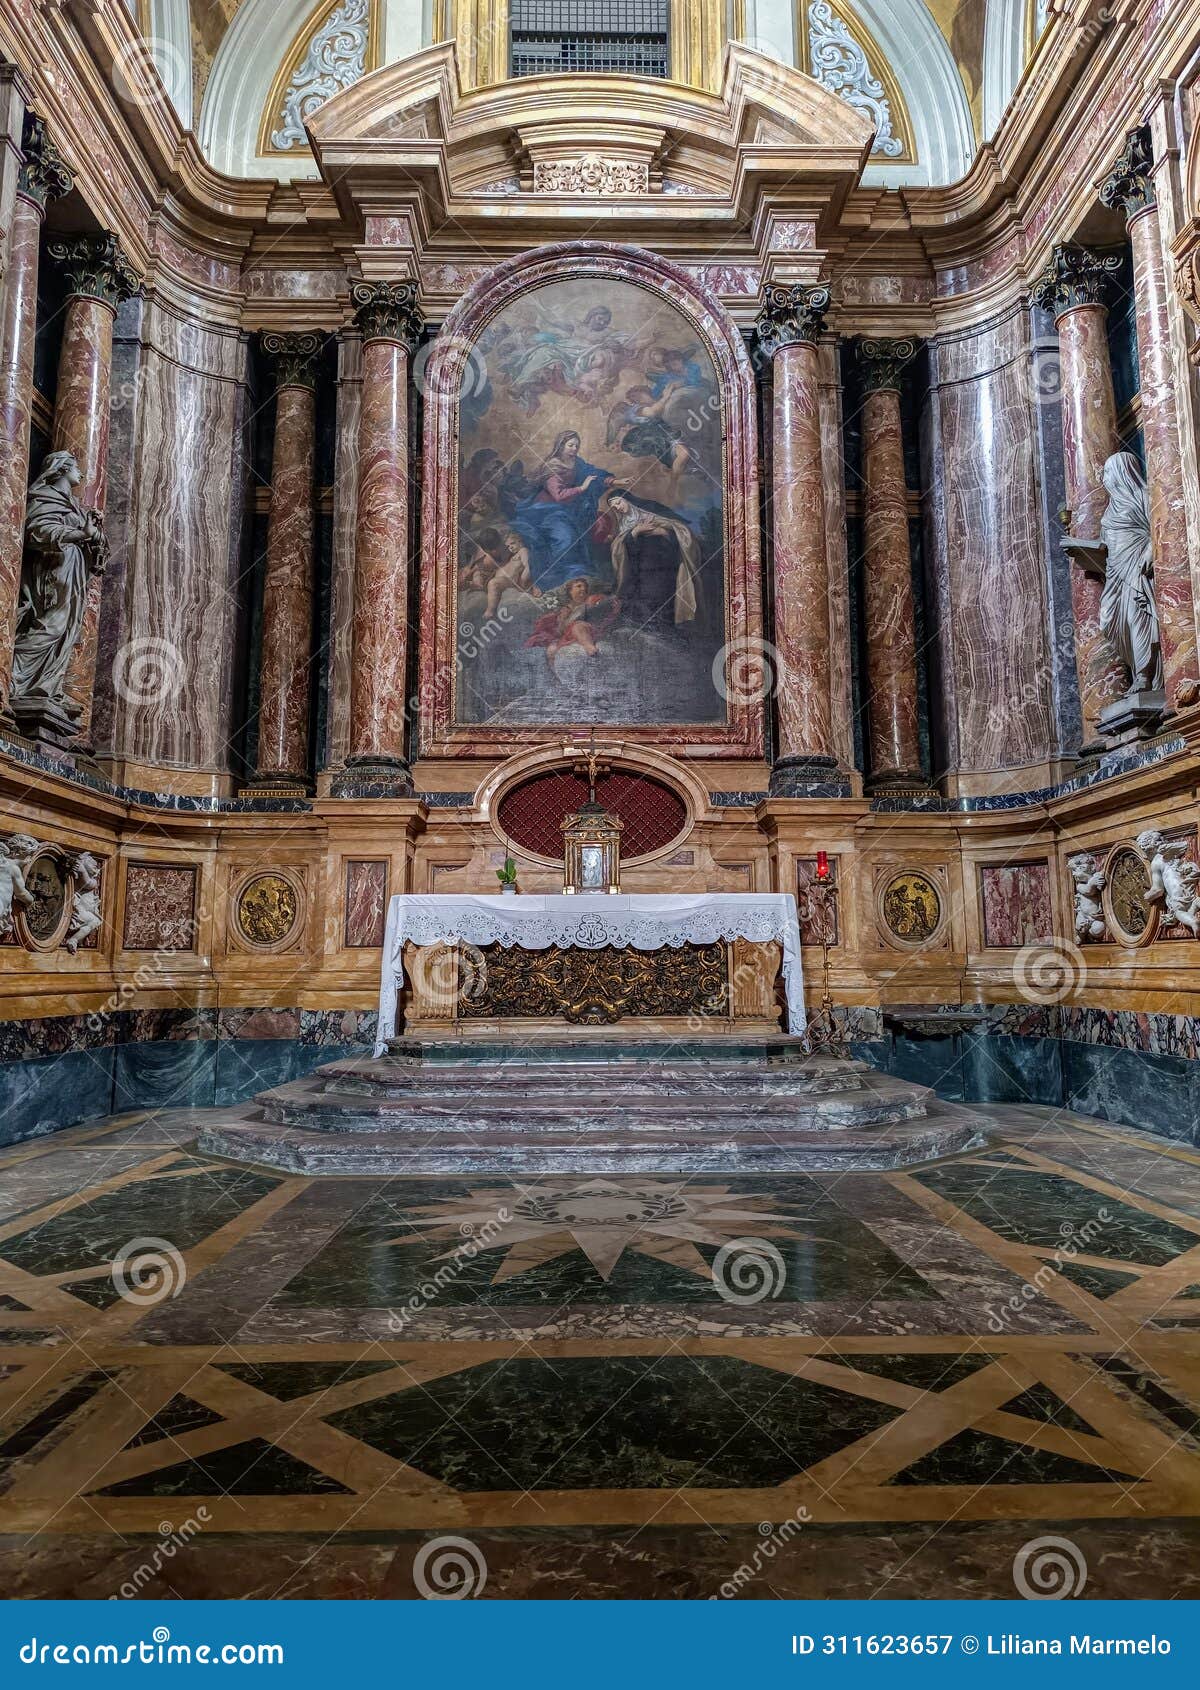 color marble altarpiece with columns and painting in the church santa maria maddalena dei pazzi, florence italy